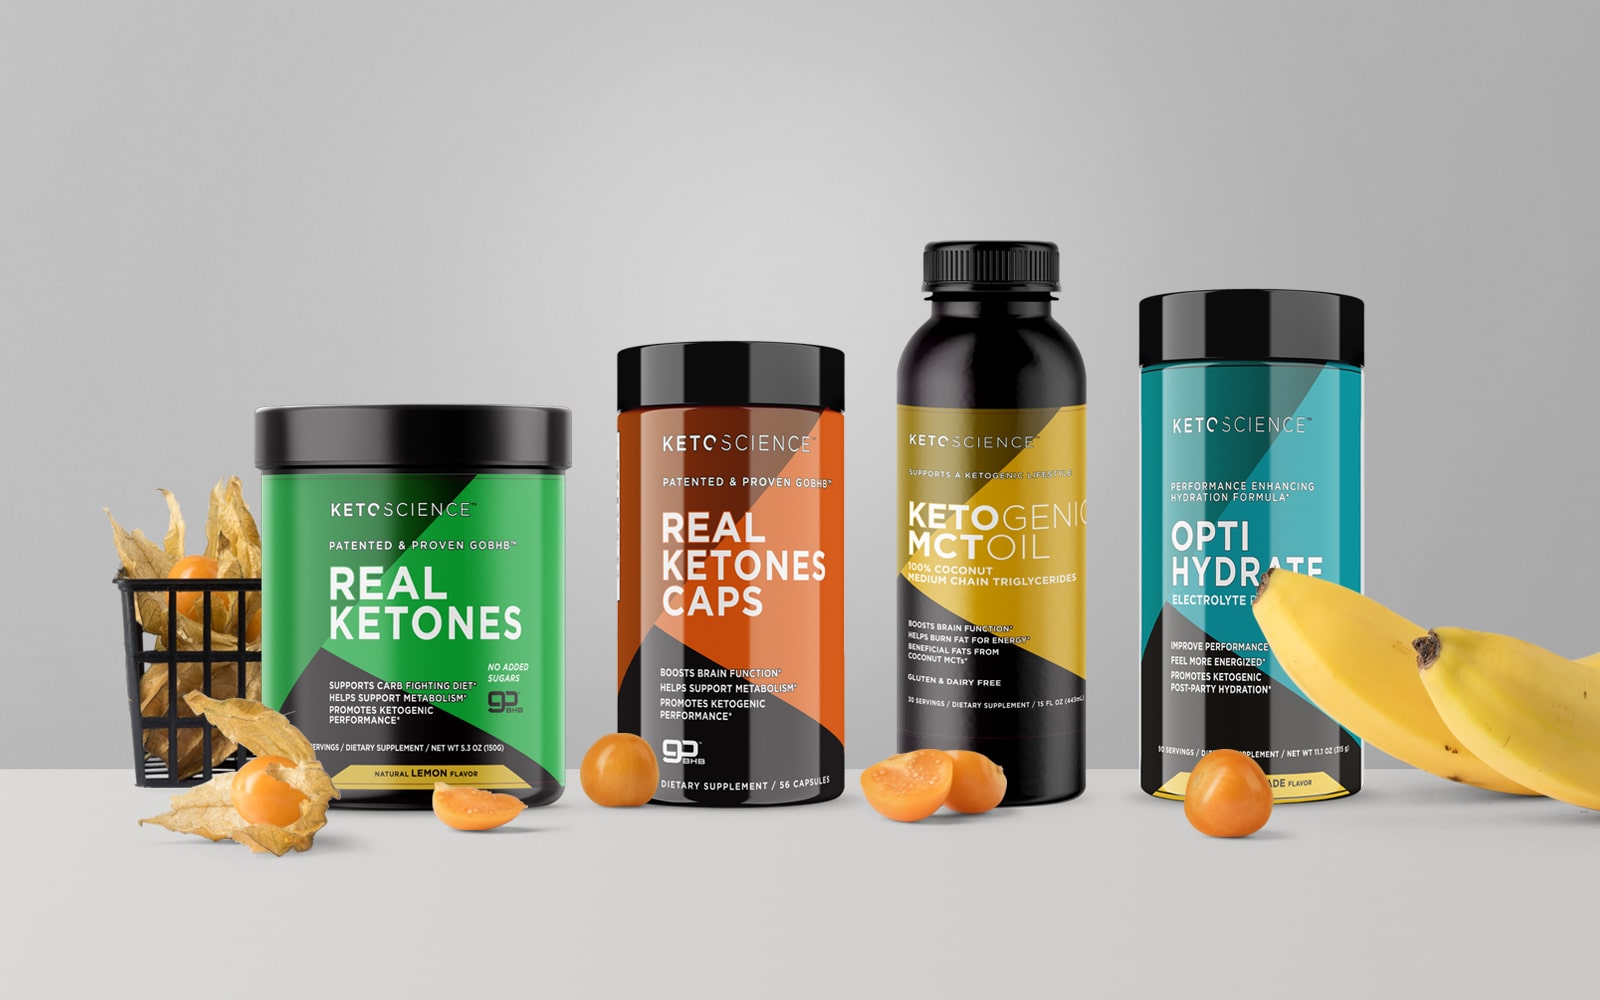 Keto Science supplement package products placed in a row with fruit against a grey backdrop.